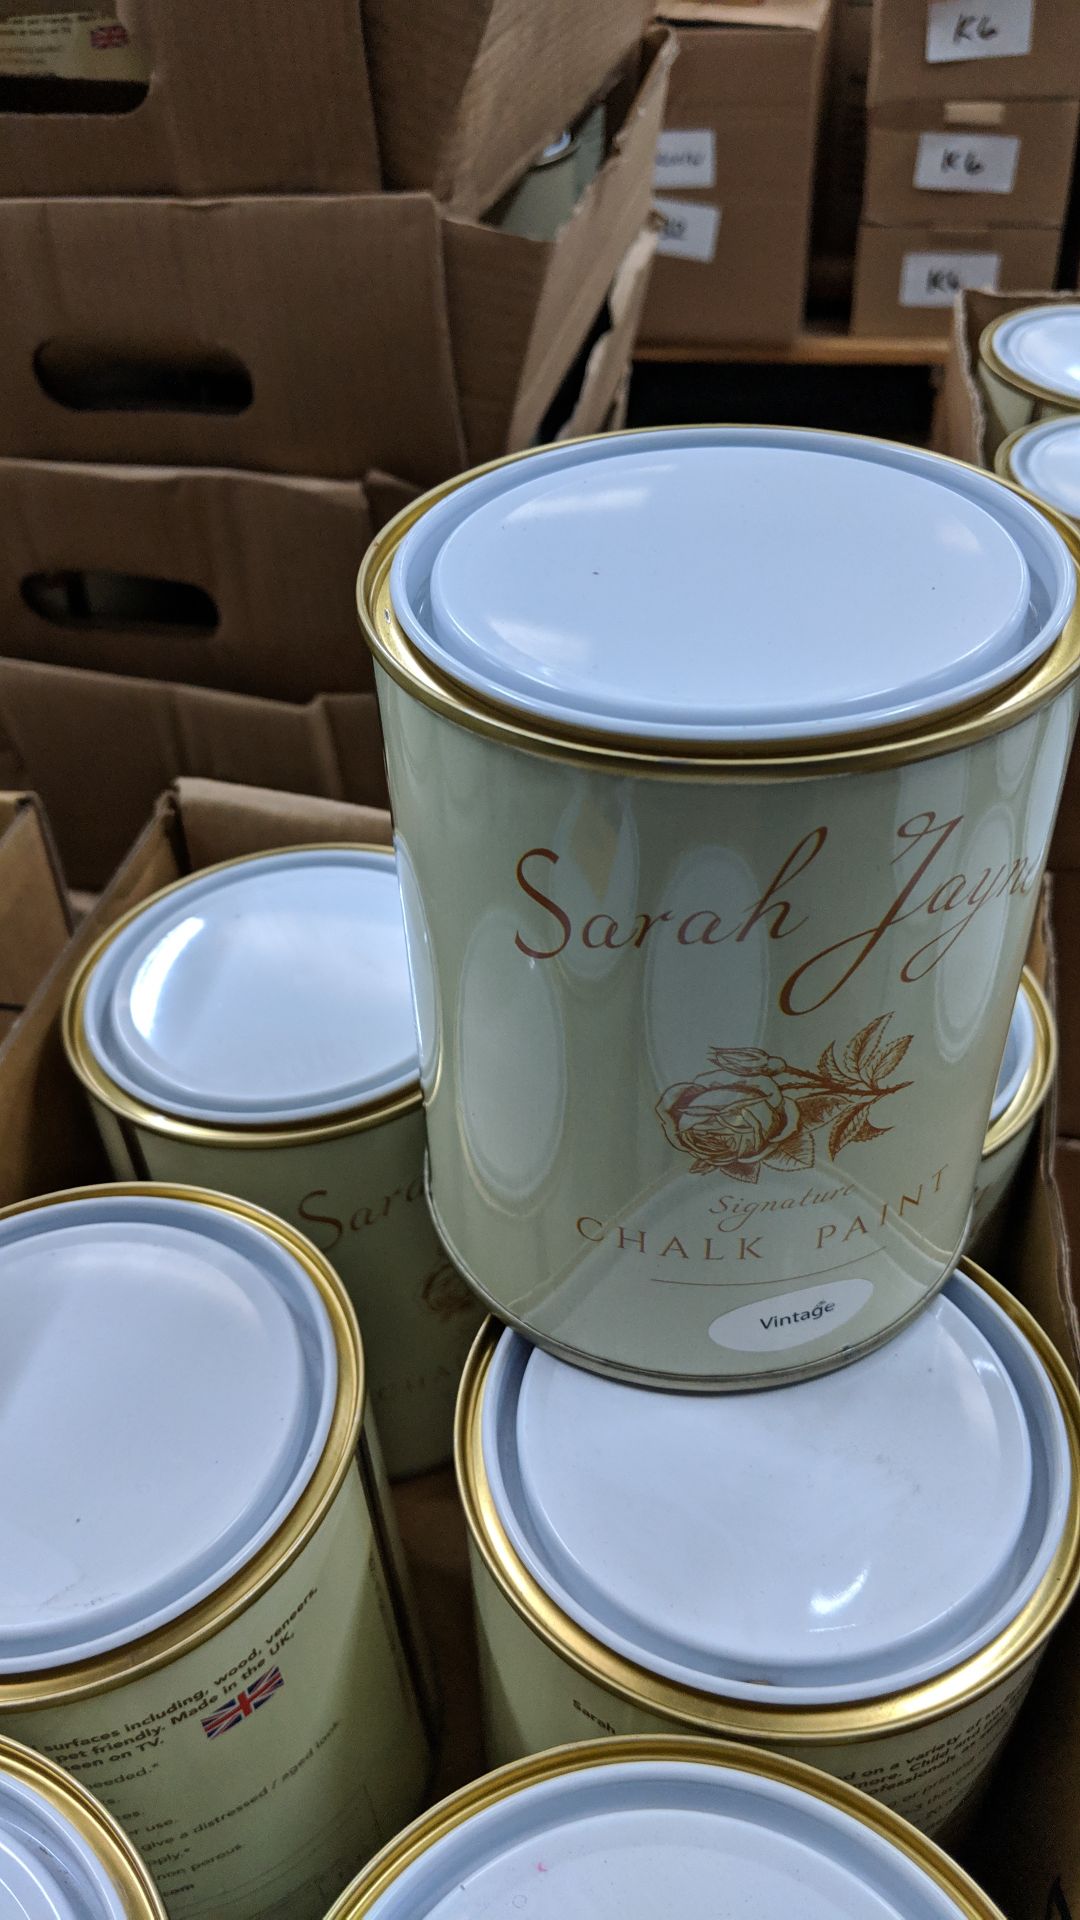 19 off 1 litre tins of Sarah Jayne signature chalk paint - colour Vintage This lot is one of a - Image 2 of 2